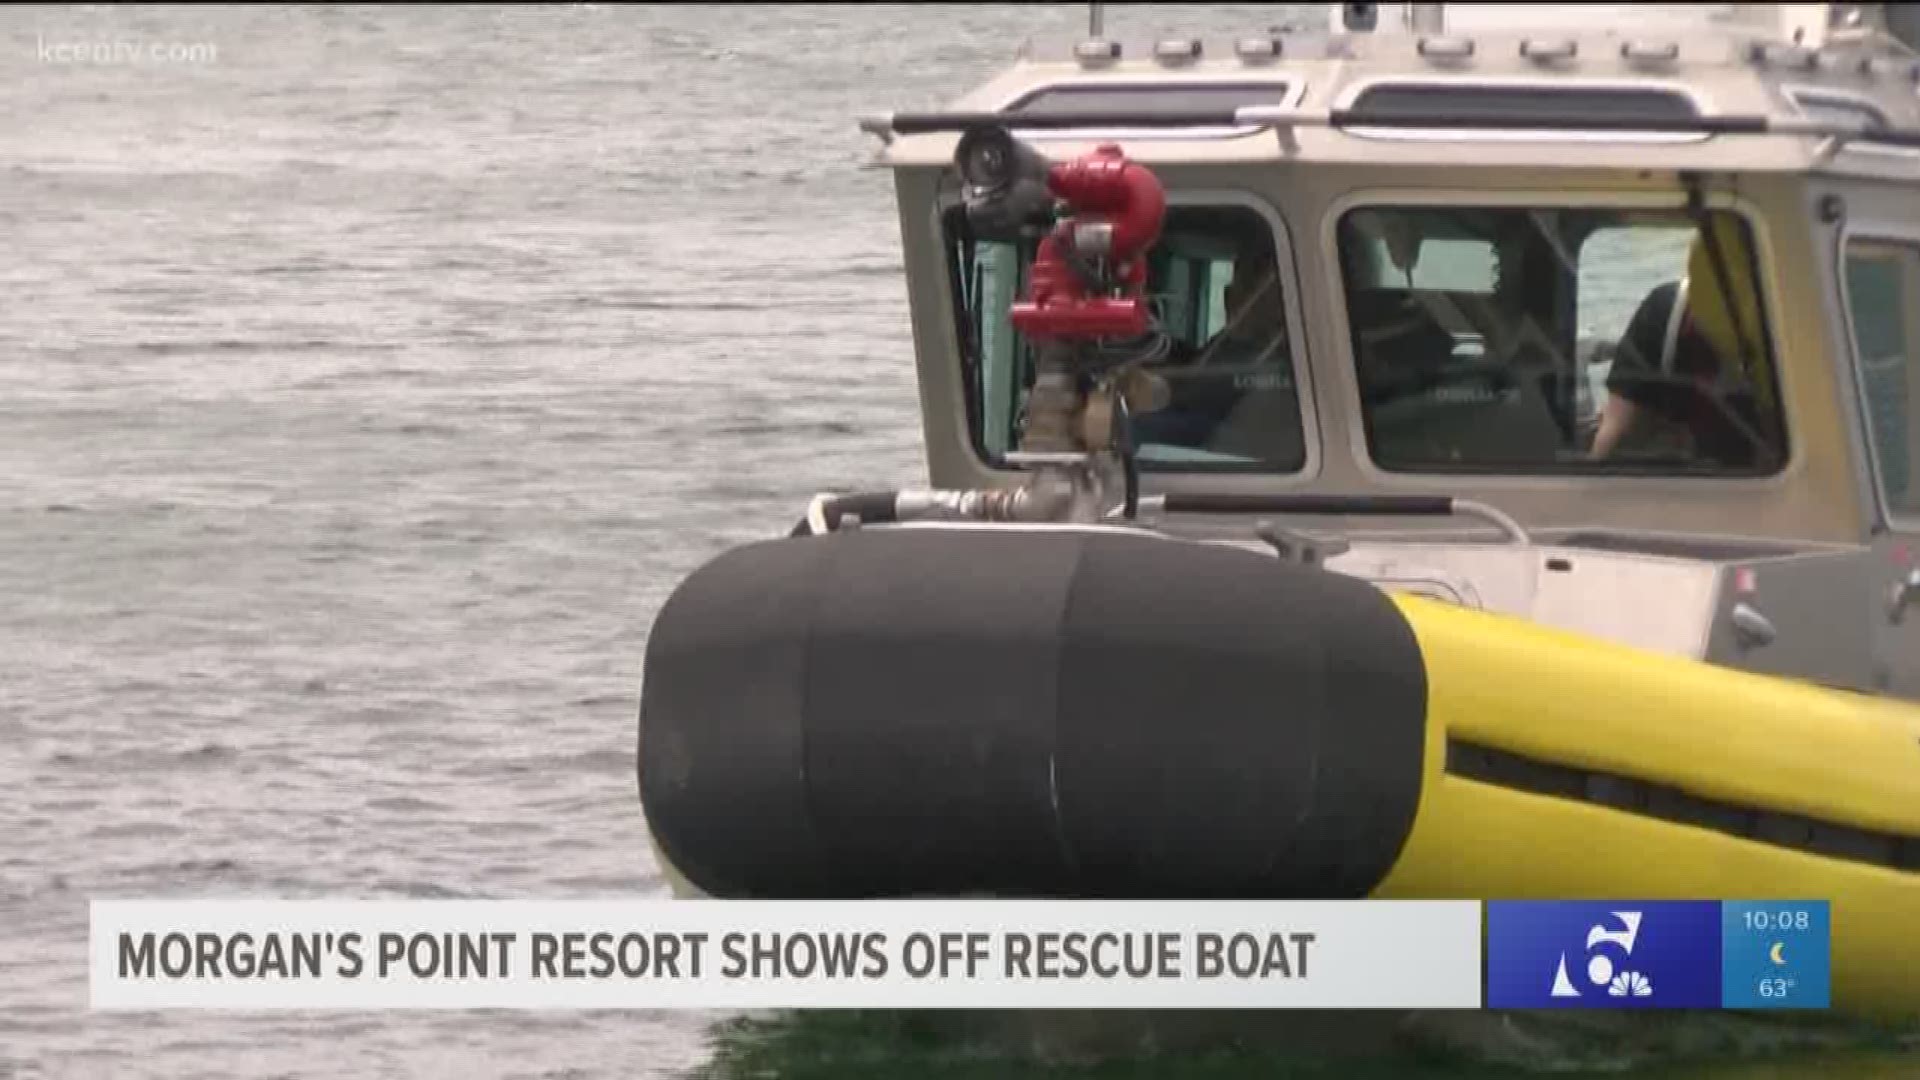 Kurtis Quillin checks out new rescue boat in Morgan's Point